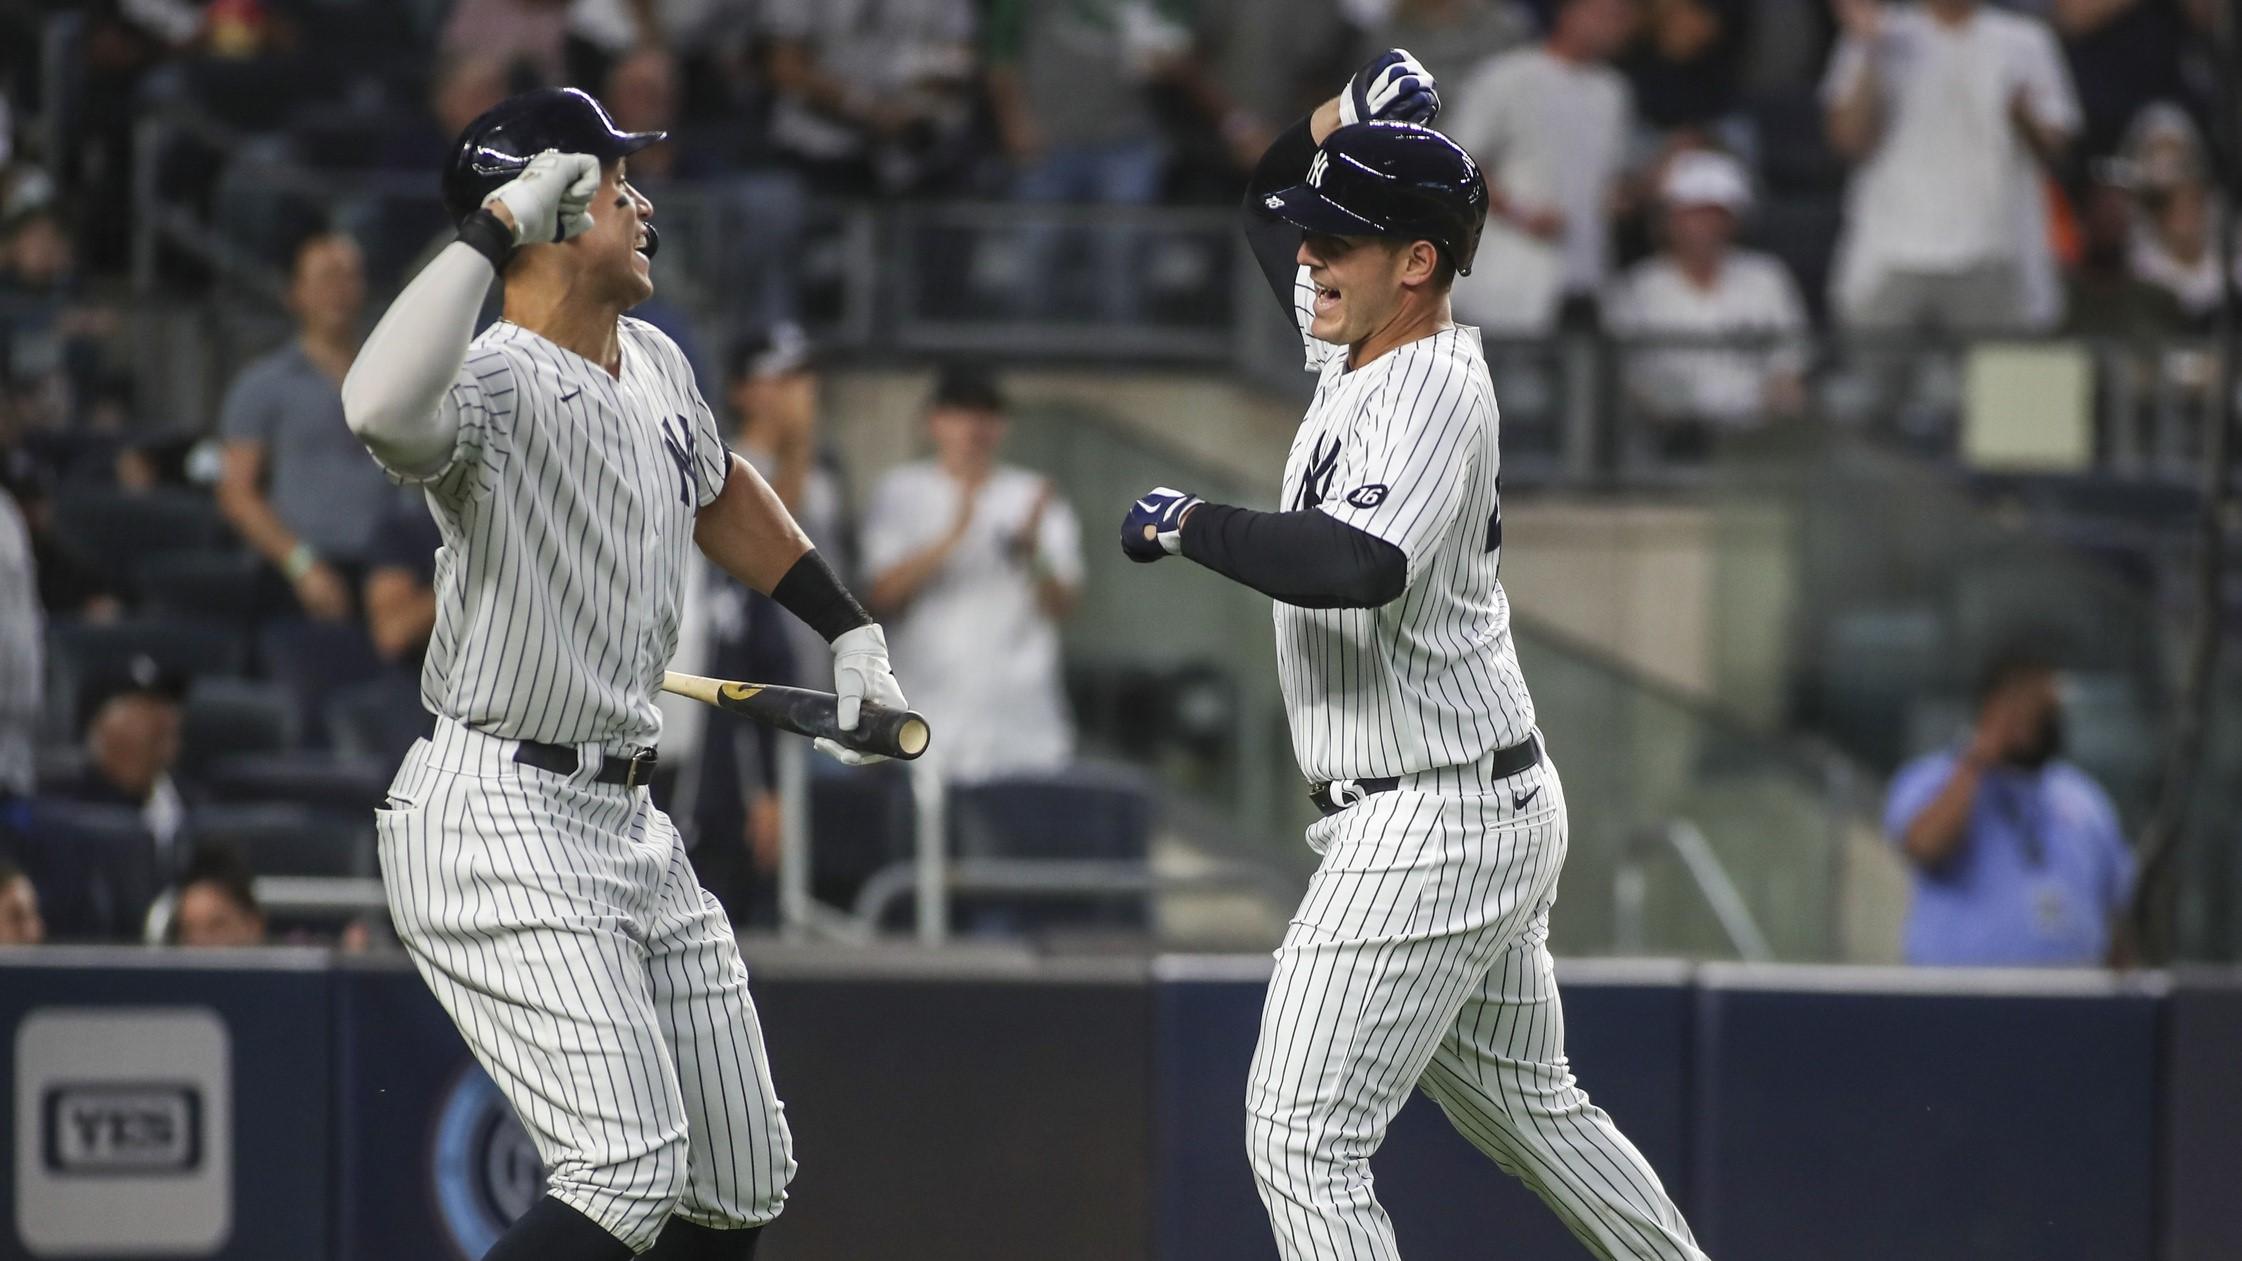 New York Yankees first baseman Anthony Rizzo (right) is greeted by right fielder Aaron Judge (left) after hitting a solo home run in the fourth inning against the Baltimore Orioles at Yankee Stadium. / Wendell Cruz-USA TODAY Sports